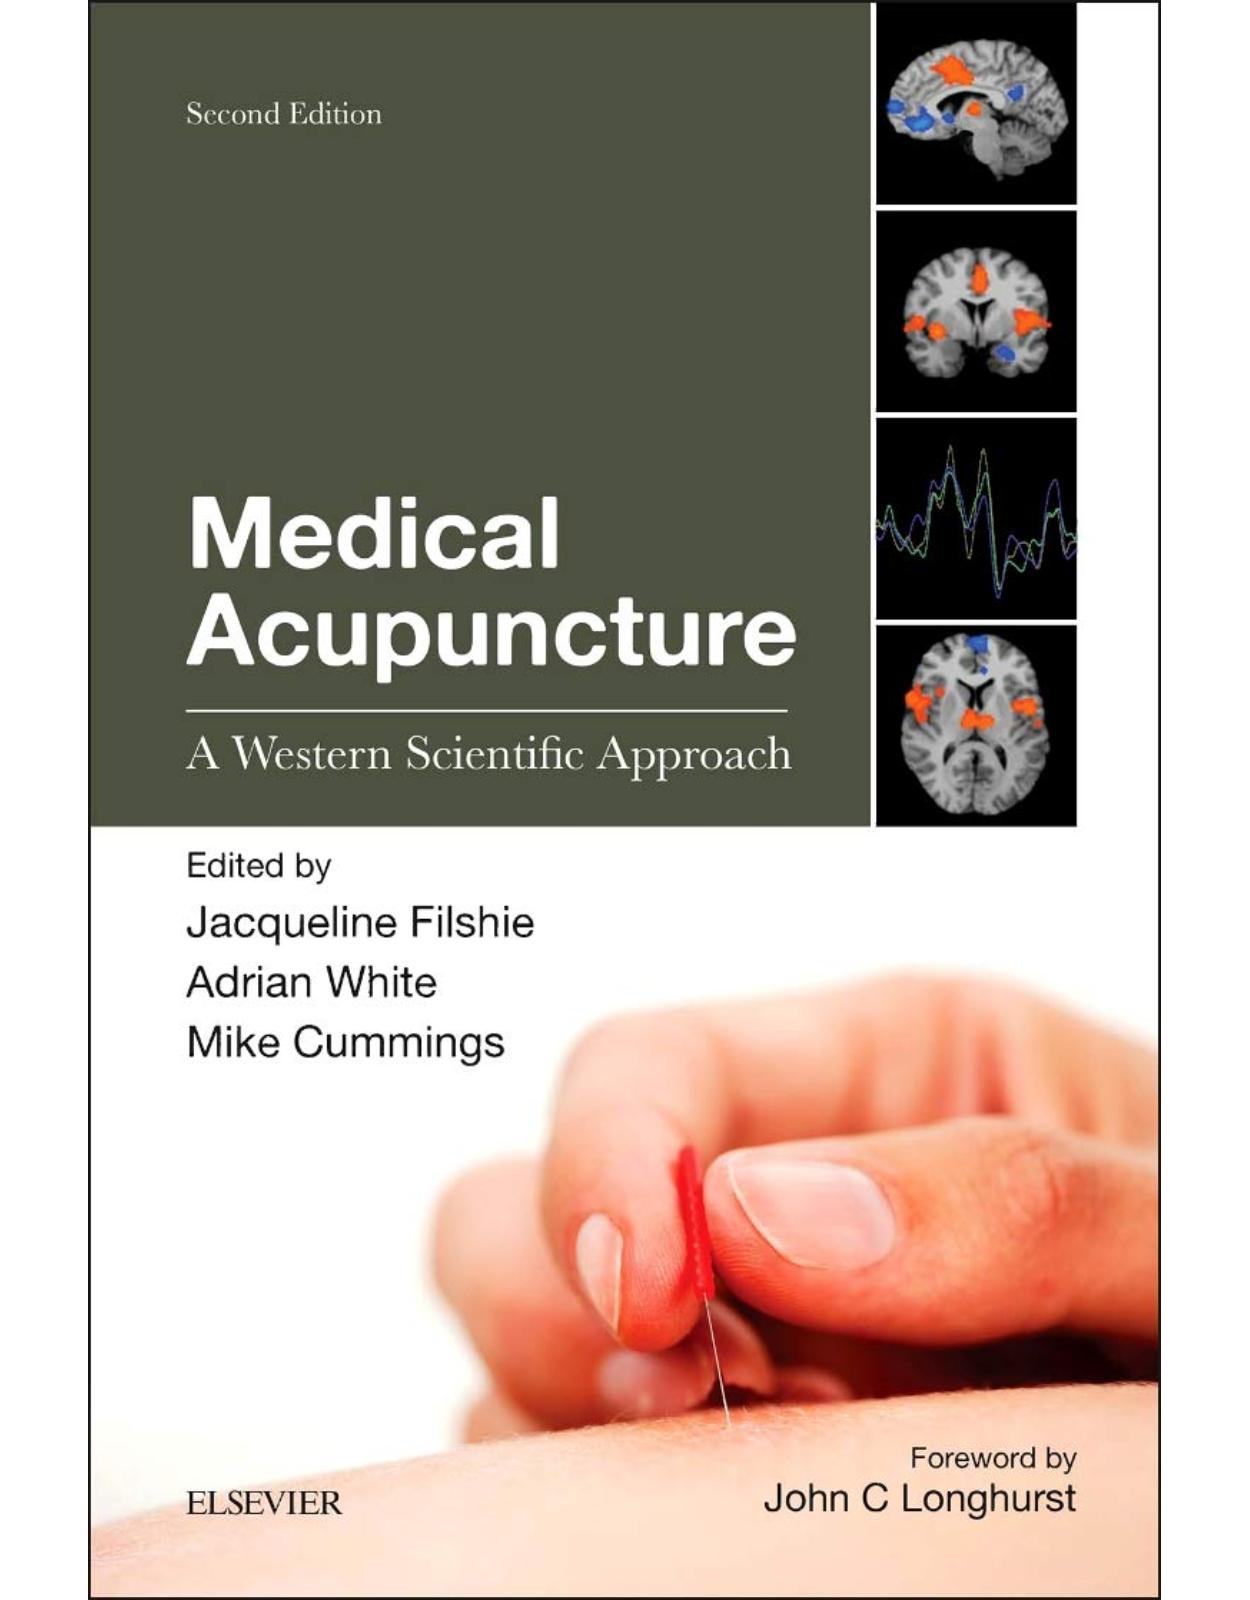 Medical Acupuncture: A Western Scientific Approach, 2e